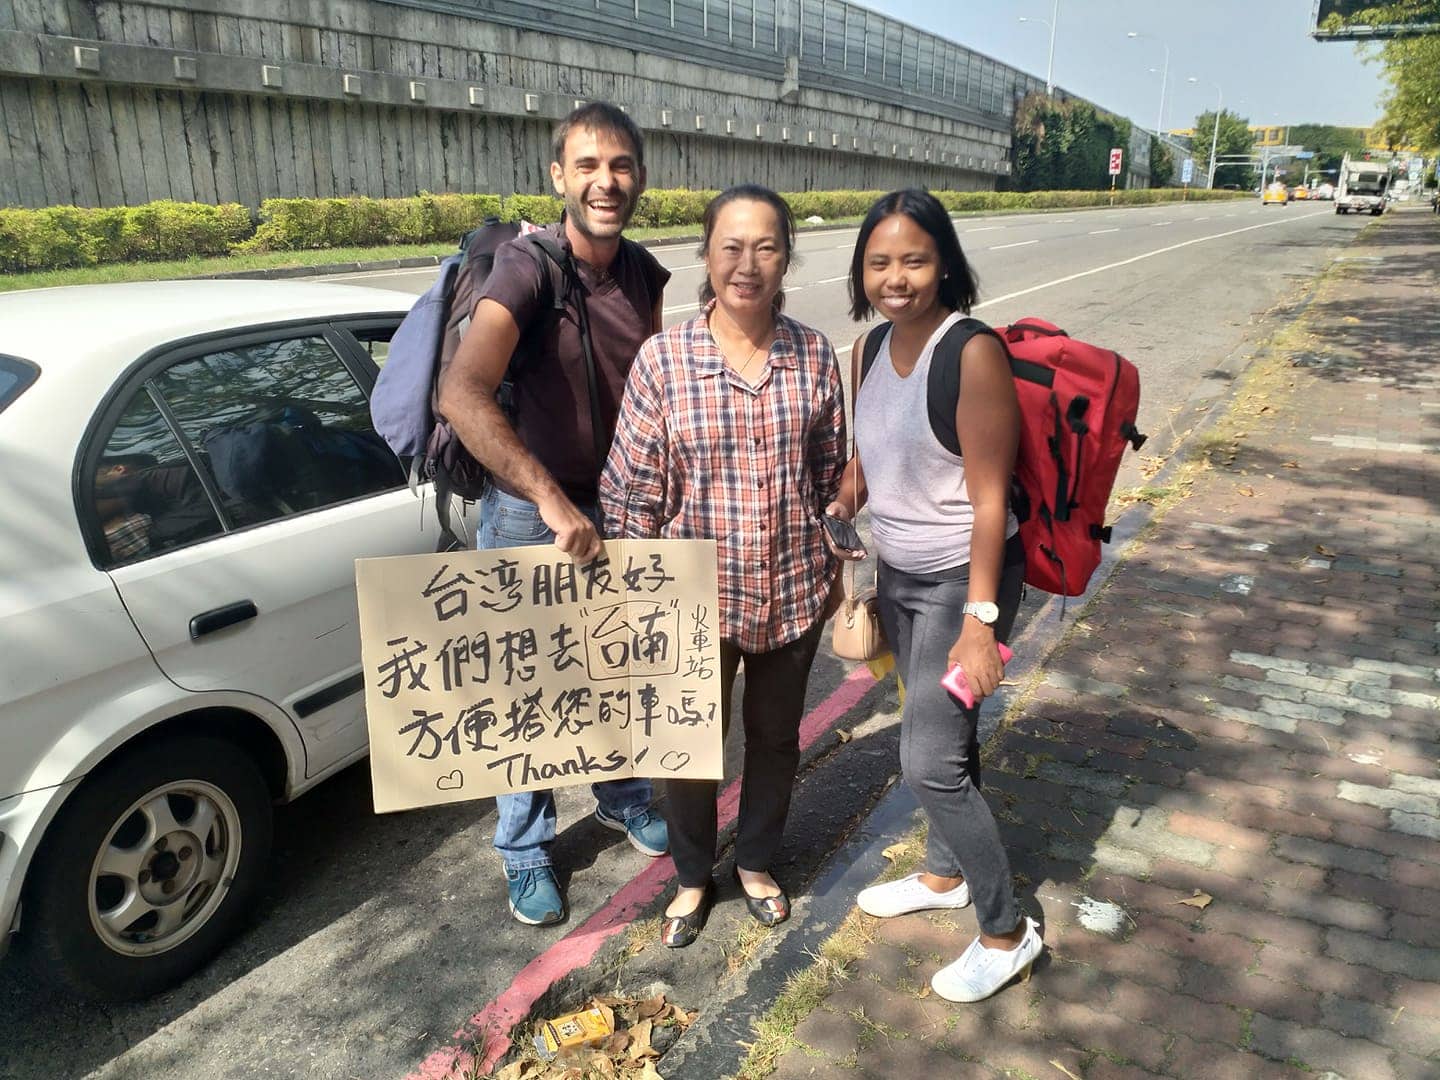 Things to know before visiting Taiwan, hitchhiking in Taiwan, how to get to Tainan, hitchhiking in Taiwan, hitchhiking in Kaohsiung